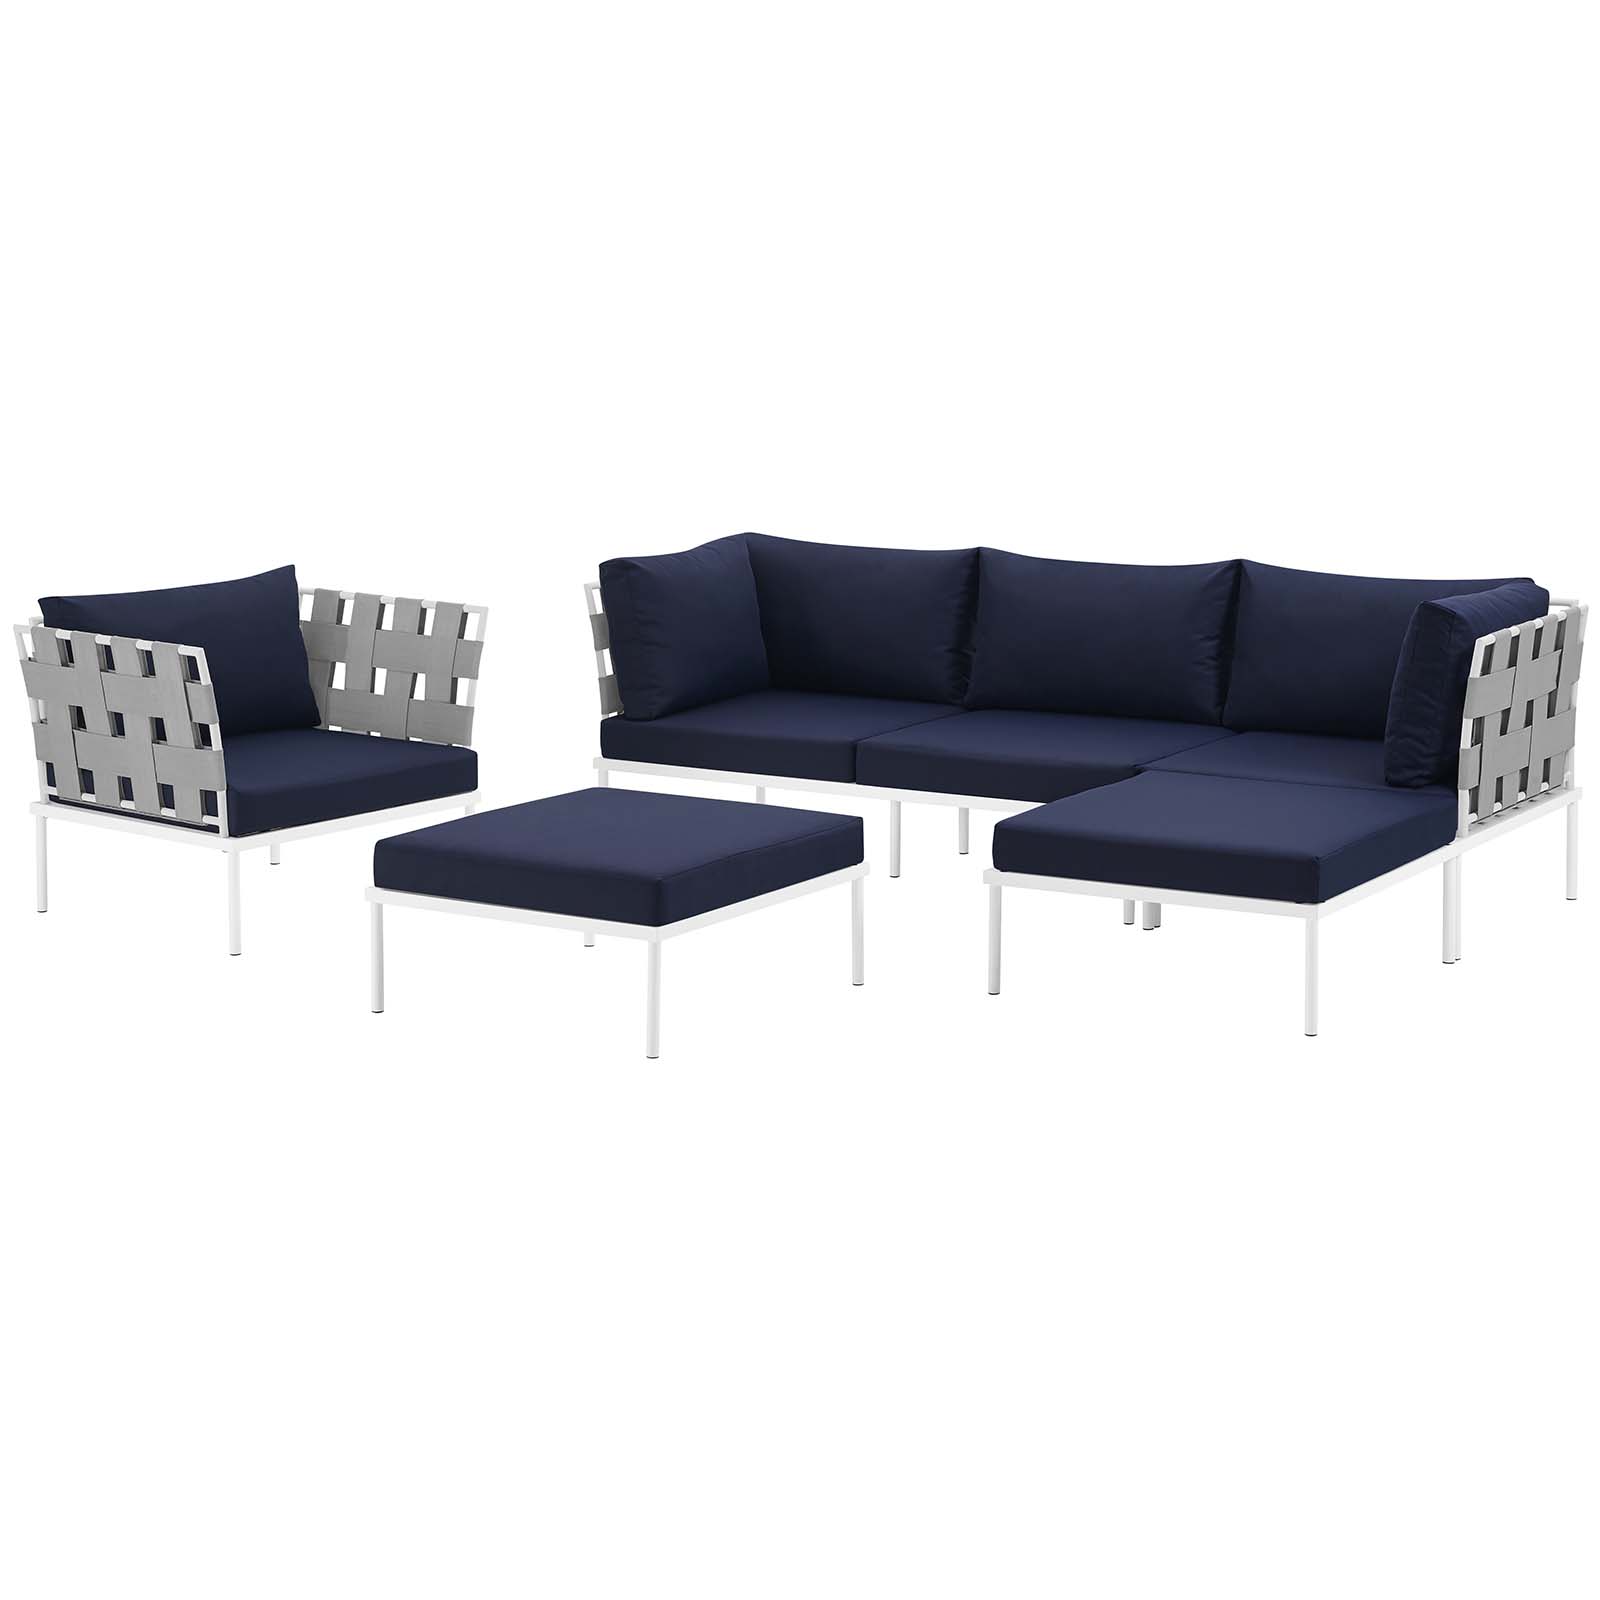 Modway Harmony 6 Piece Outdoor Patio Aluminum Sectional Sofa Set in White Navy - image 3 of 8